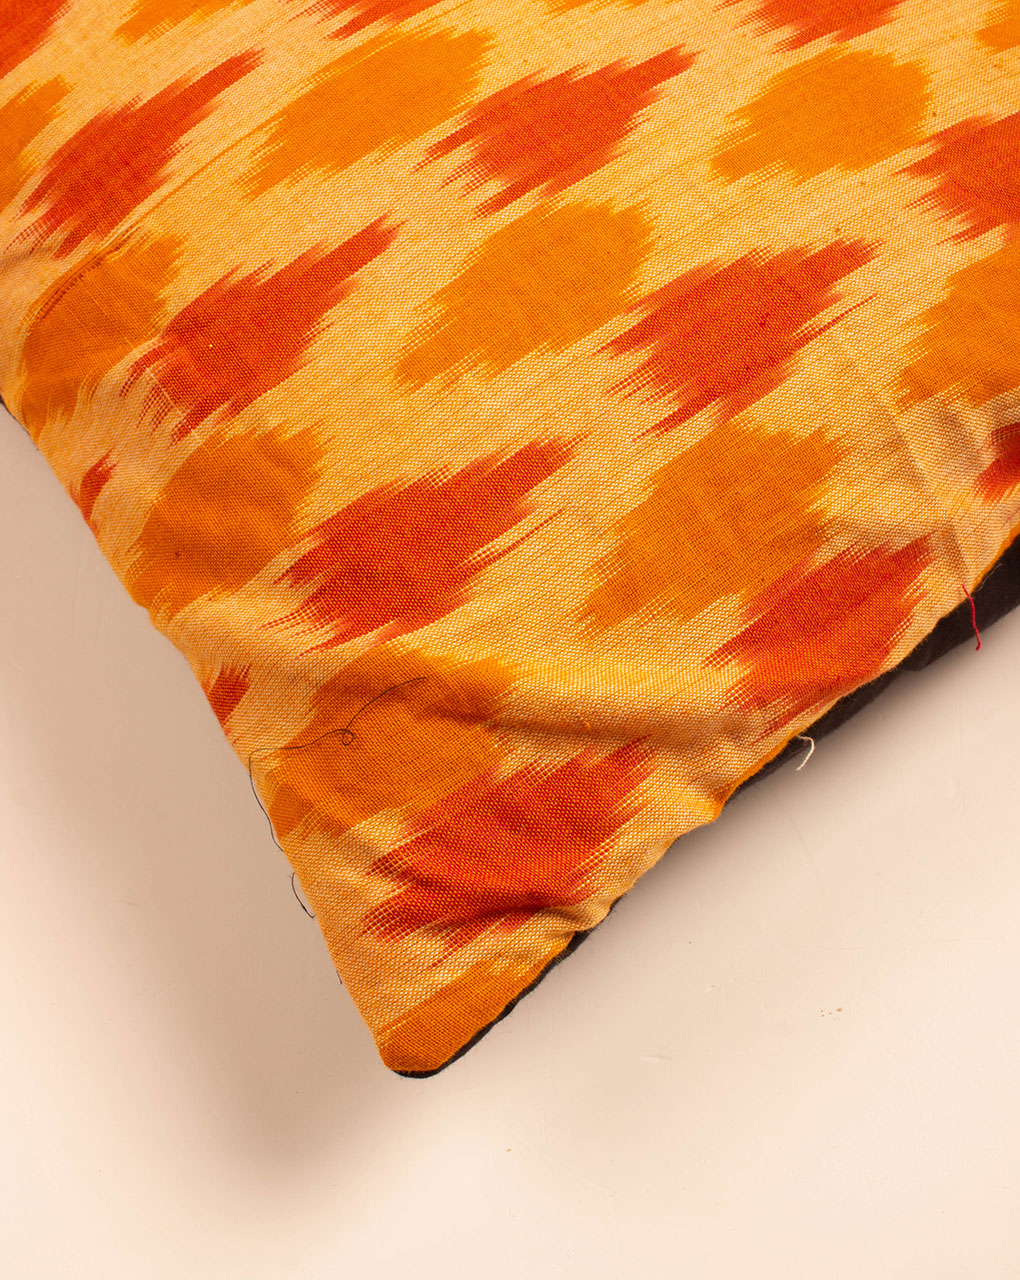 Hand Crafted Ikat Cotton Cushion Cover ( 16X16 Inches ) - Fabriclore.com